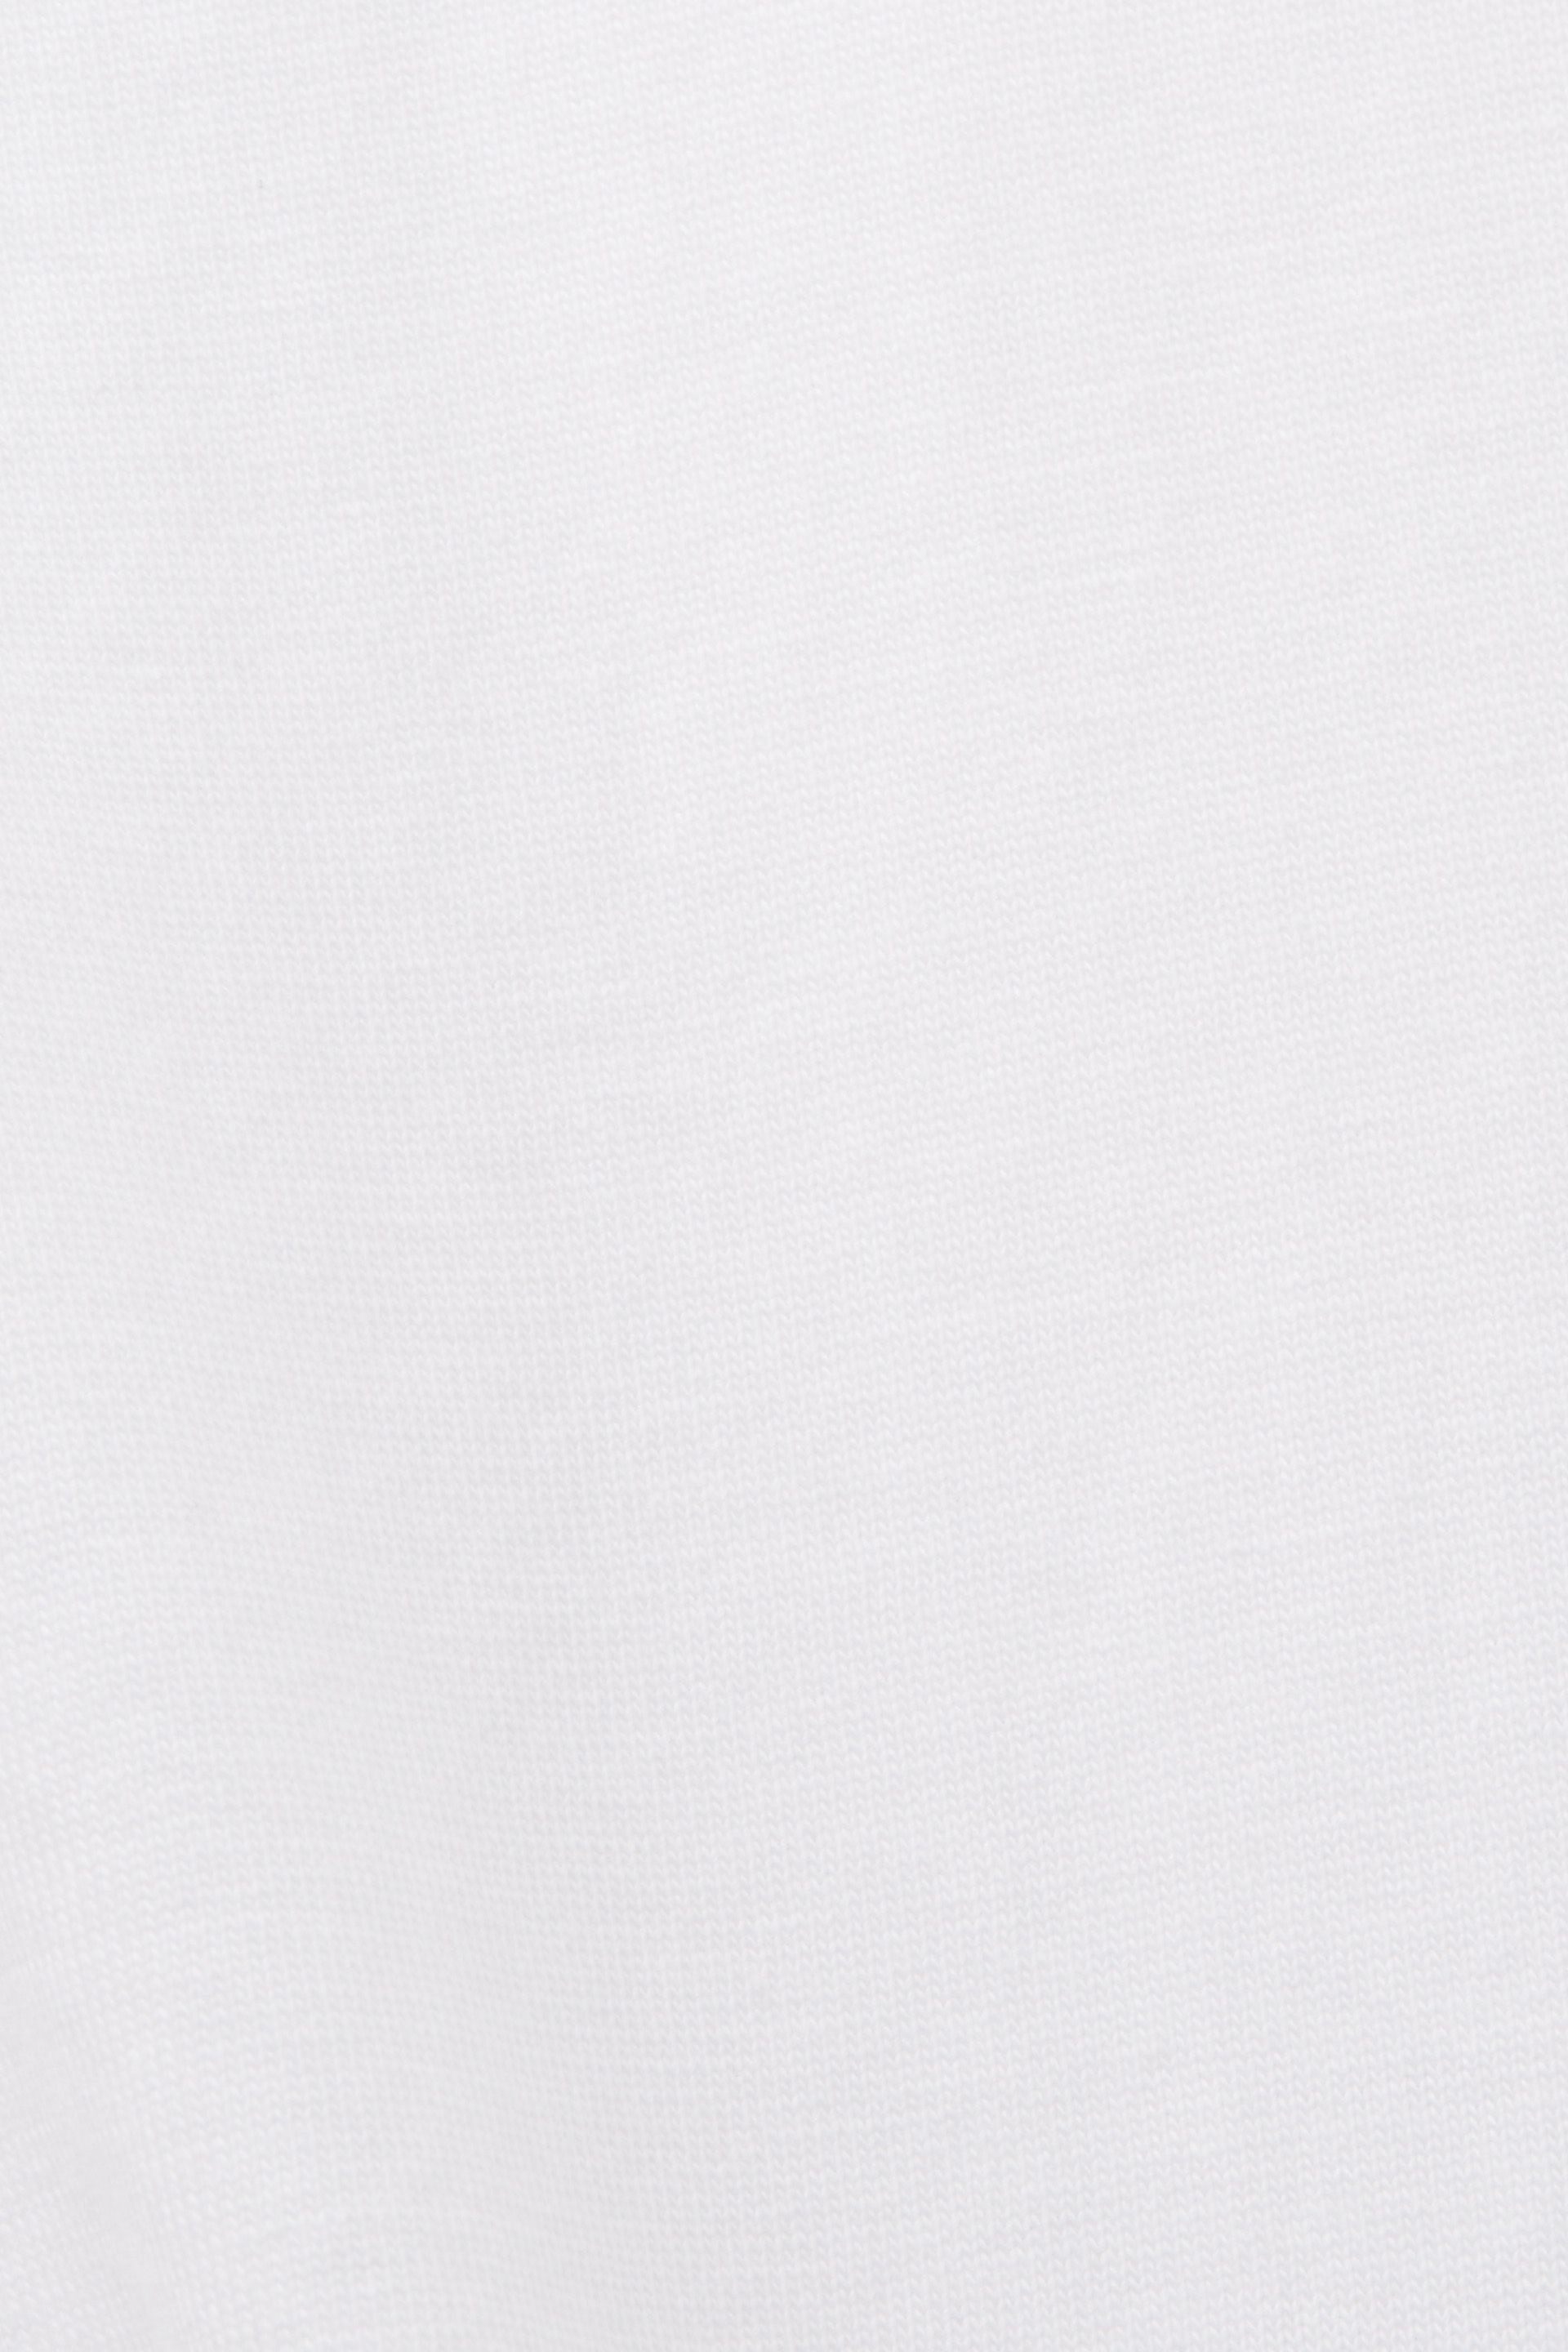 Esprit - Cotton T-shirt with print, White, large image number 3